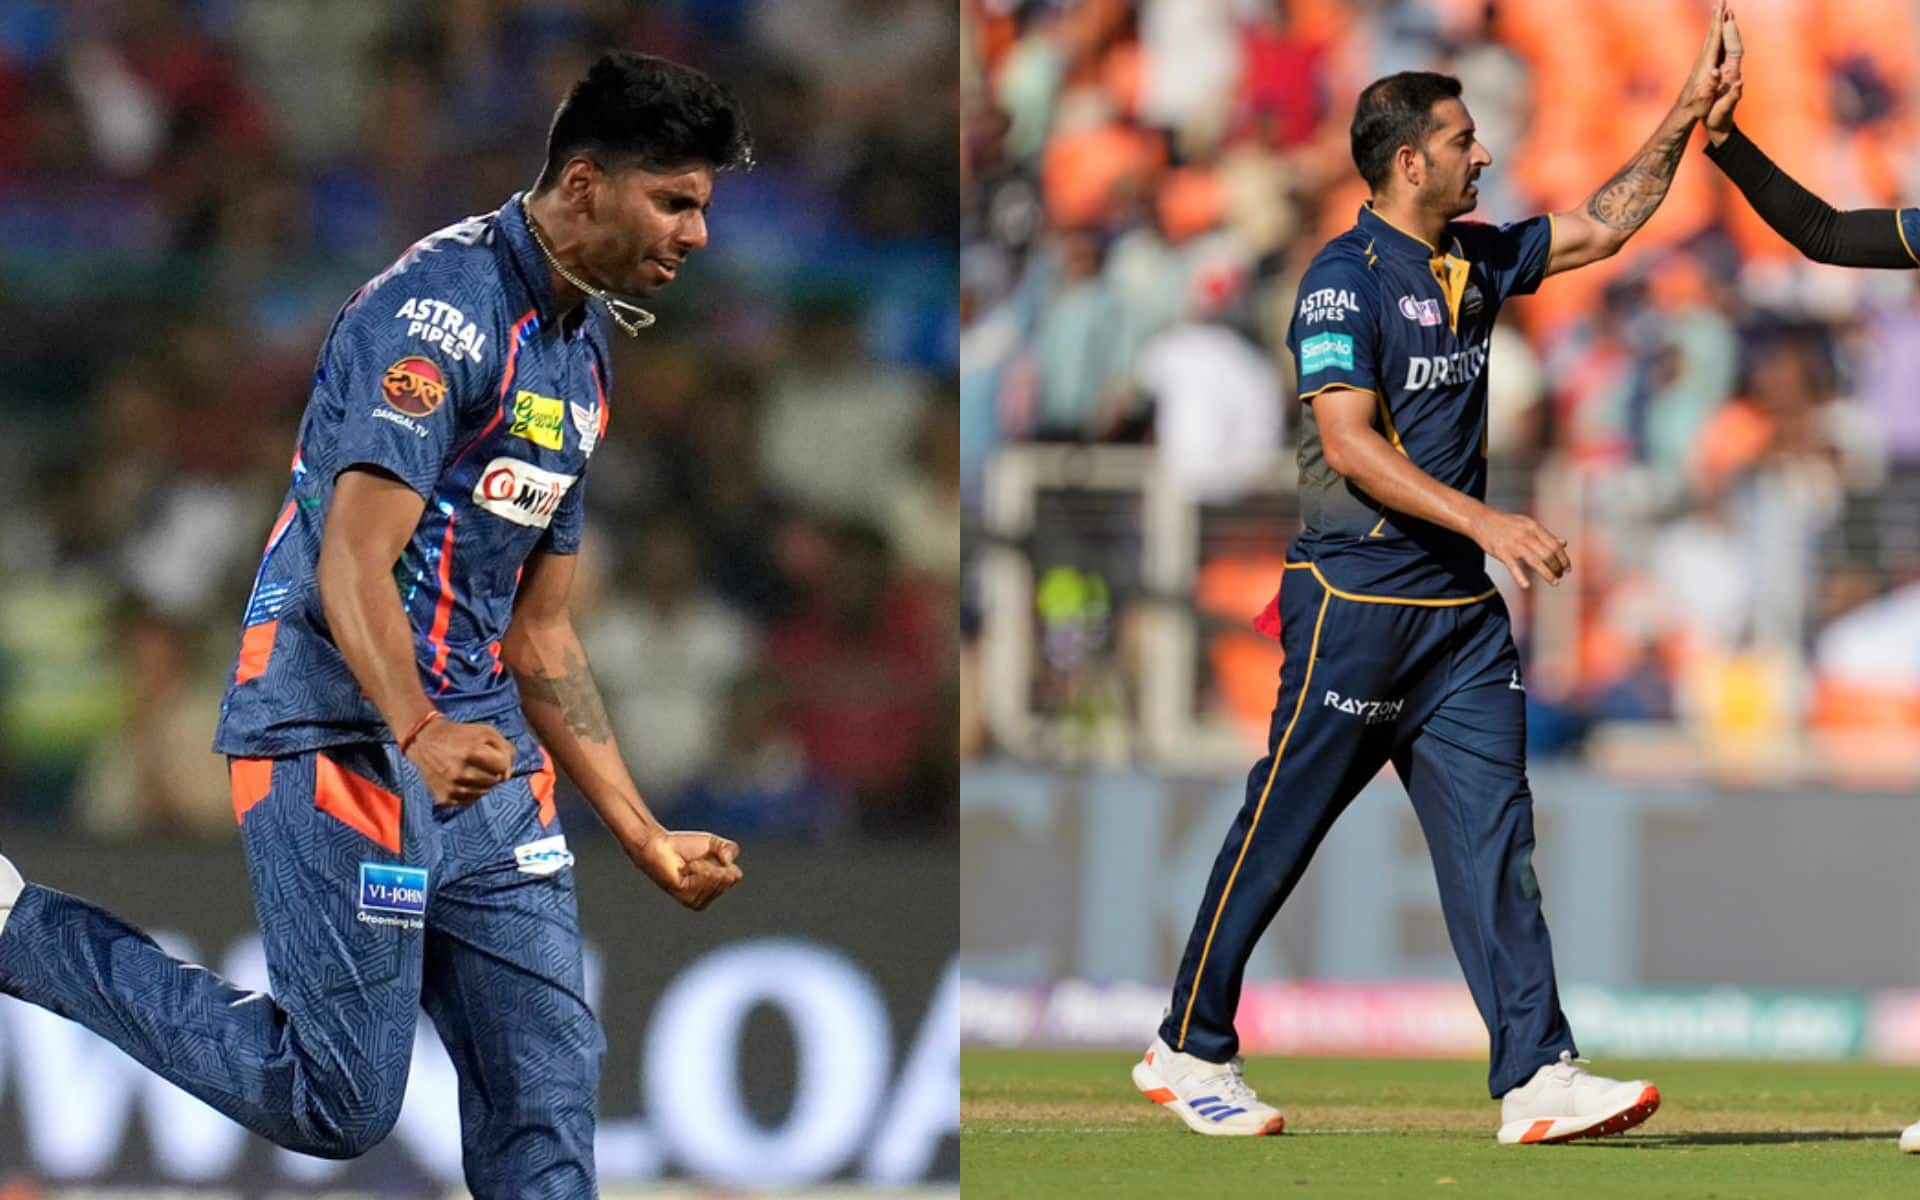 Mayank Yadav and Mohit Sharma will be important for their teams in the match [AP Photos]